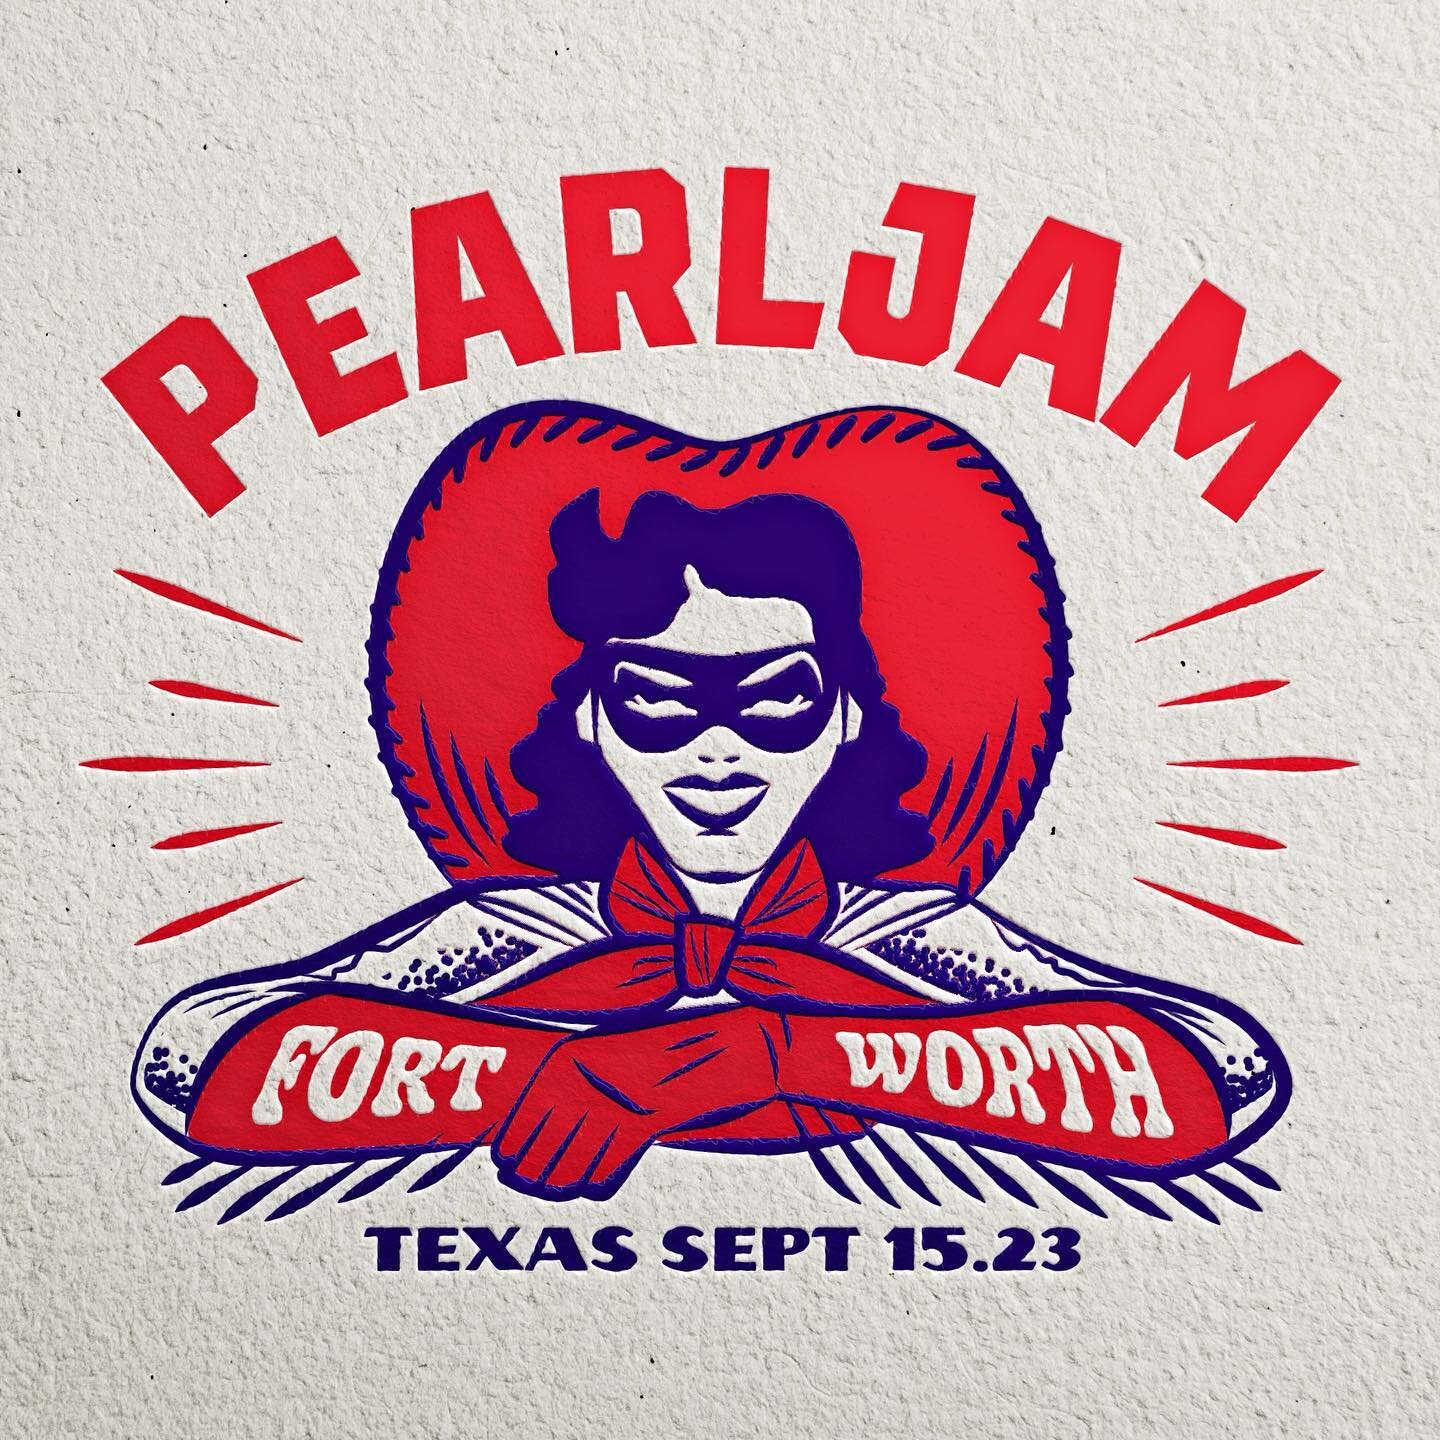 Here&rsquo;s another tee design from PEARL JAM&rsquo;s recent tour.
It was a refernce to Fort Worth being the home of the National Cowgirl Museum
Huge thanks to @MrTsurt &amp; @IanWilliamsArt for the opportunity

#PearlJam #EddieVedder #vectorillustr